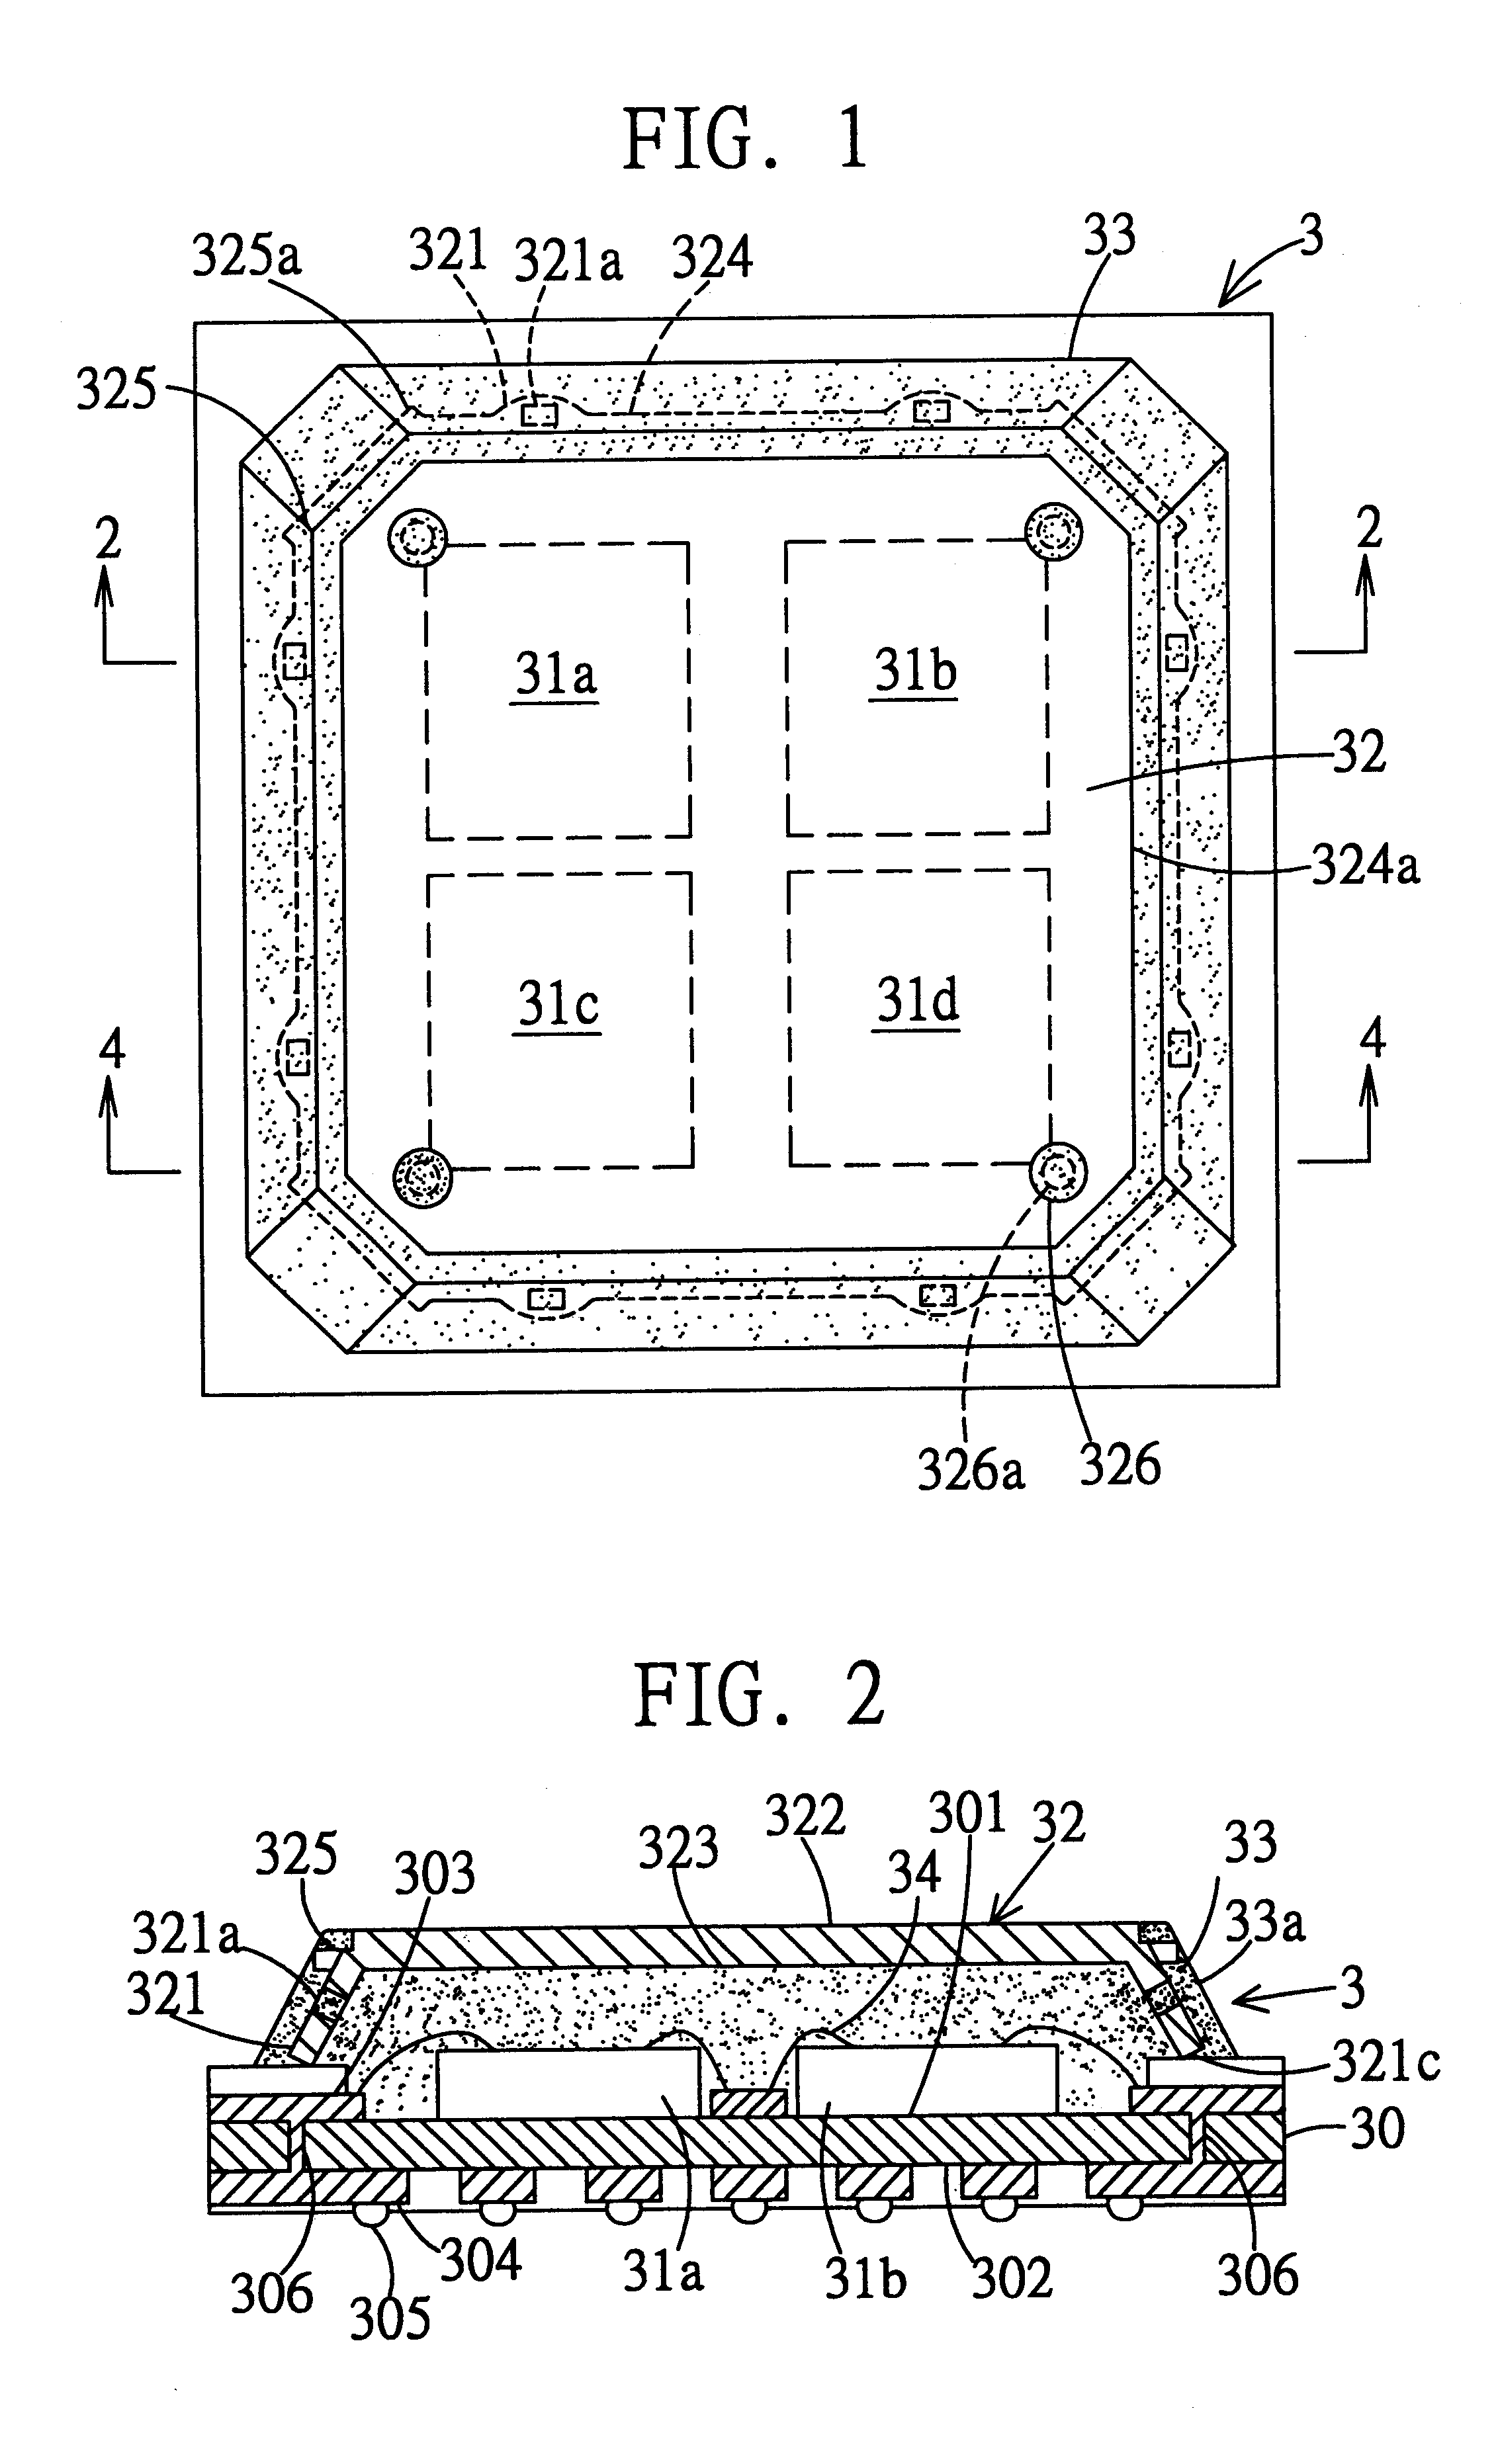 Semiconductor package having a heat sink with an exposed surface